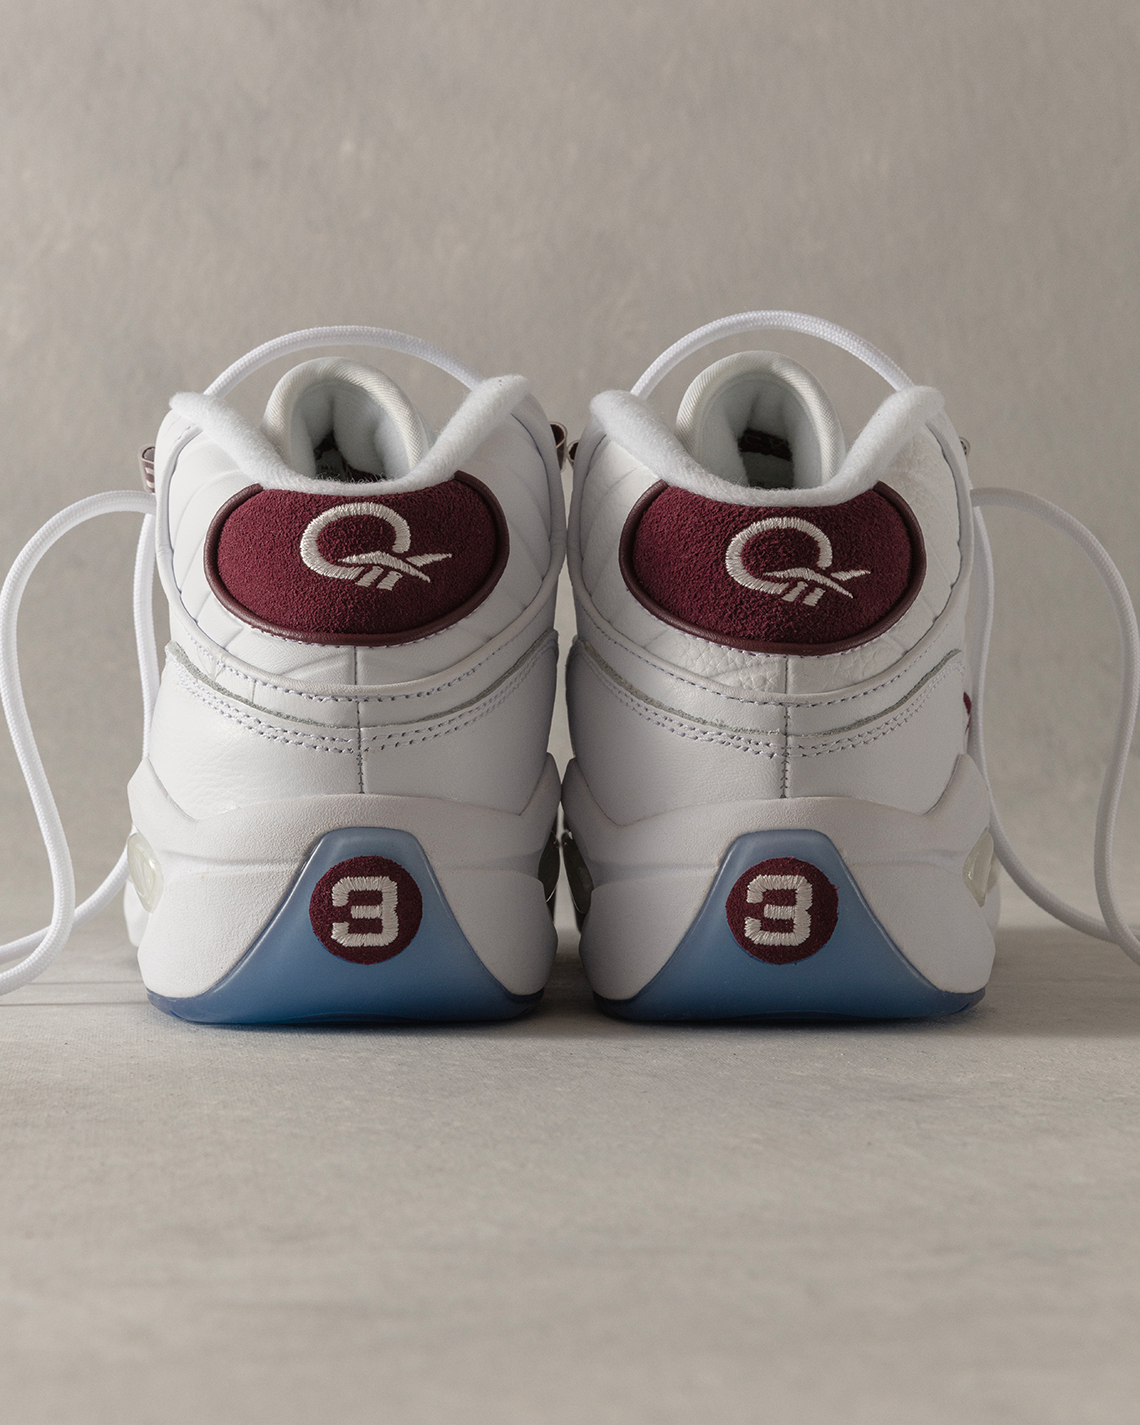 Packer brand new with original box Reebok Royal Glide Ripple Clip CM9099 Burgundy Suede Release Date 8